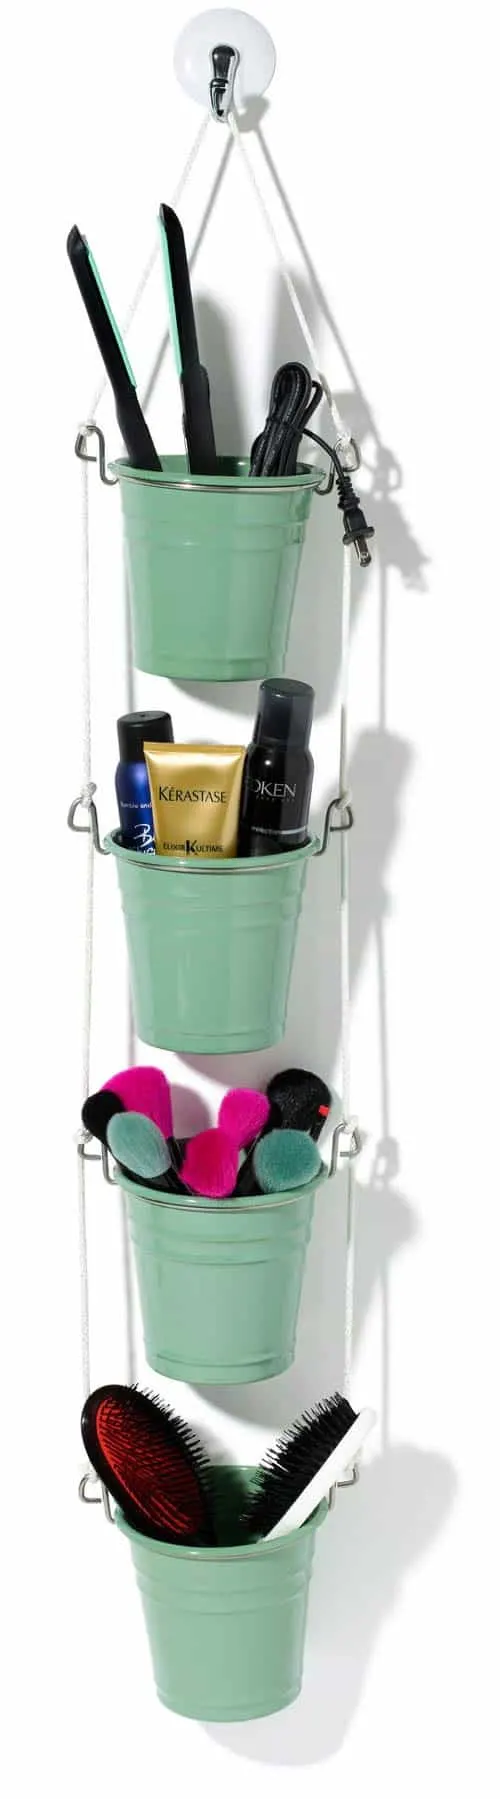 four small buckets hanging vertically holding hair brushes, makeup brushes, hair tools and hair products.